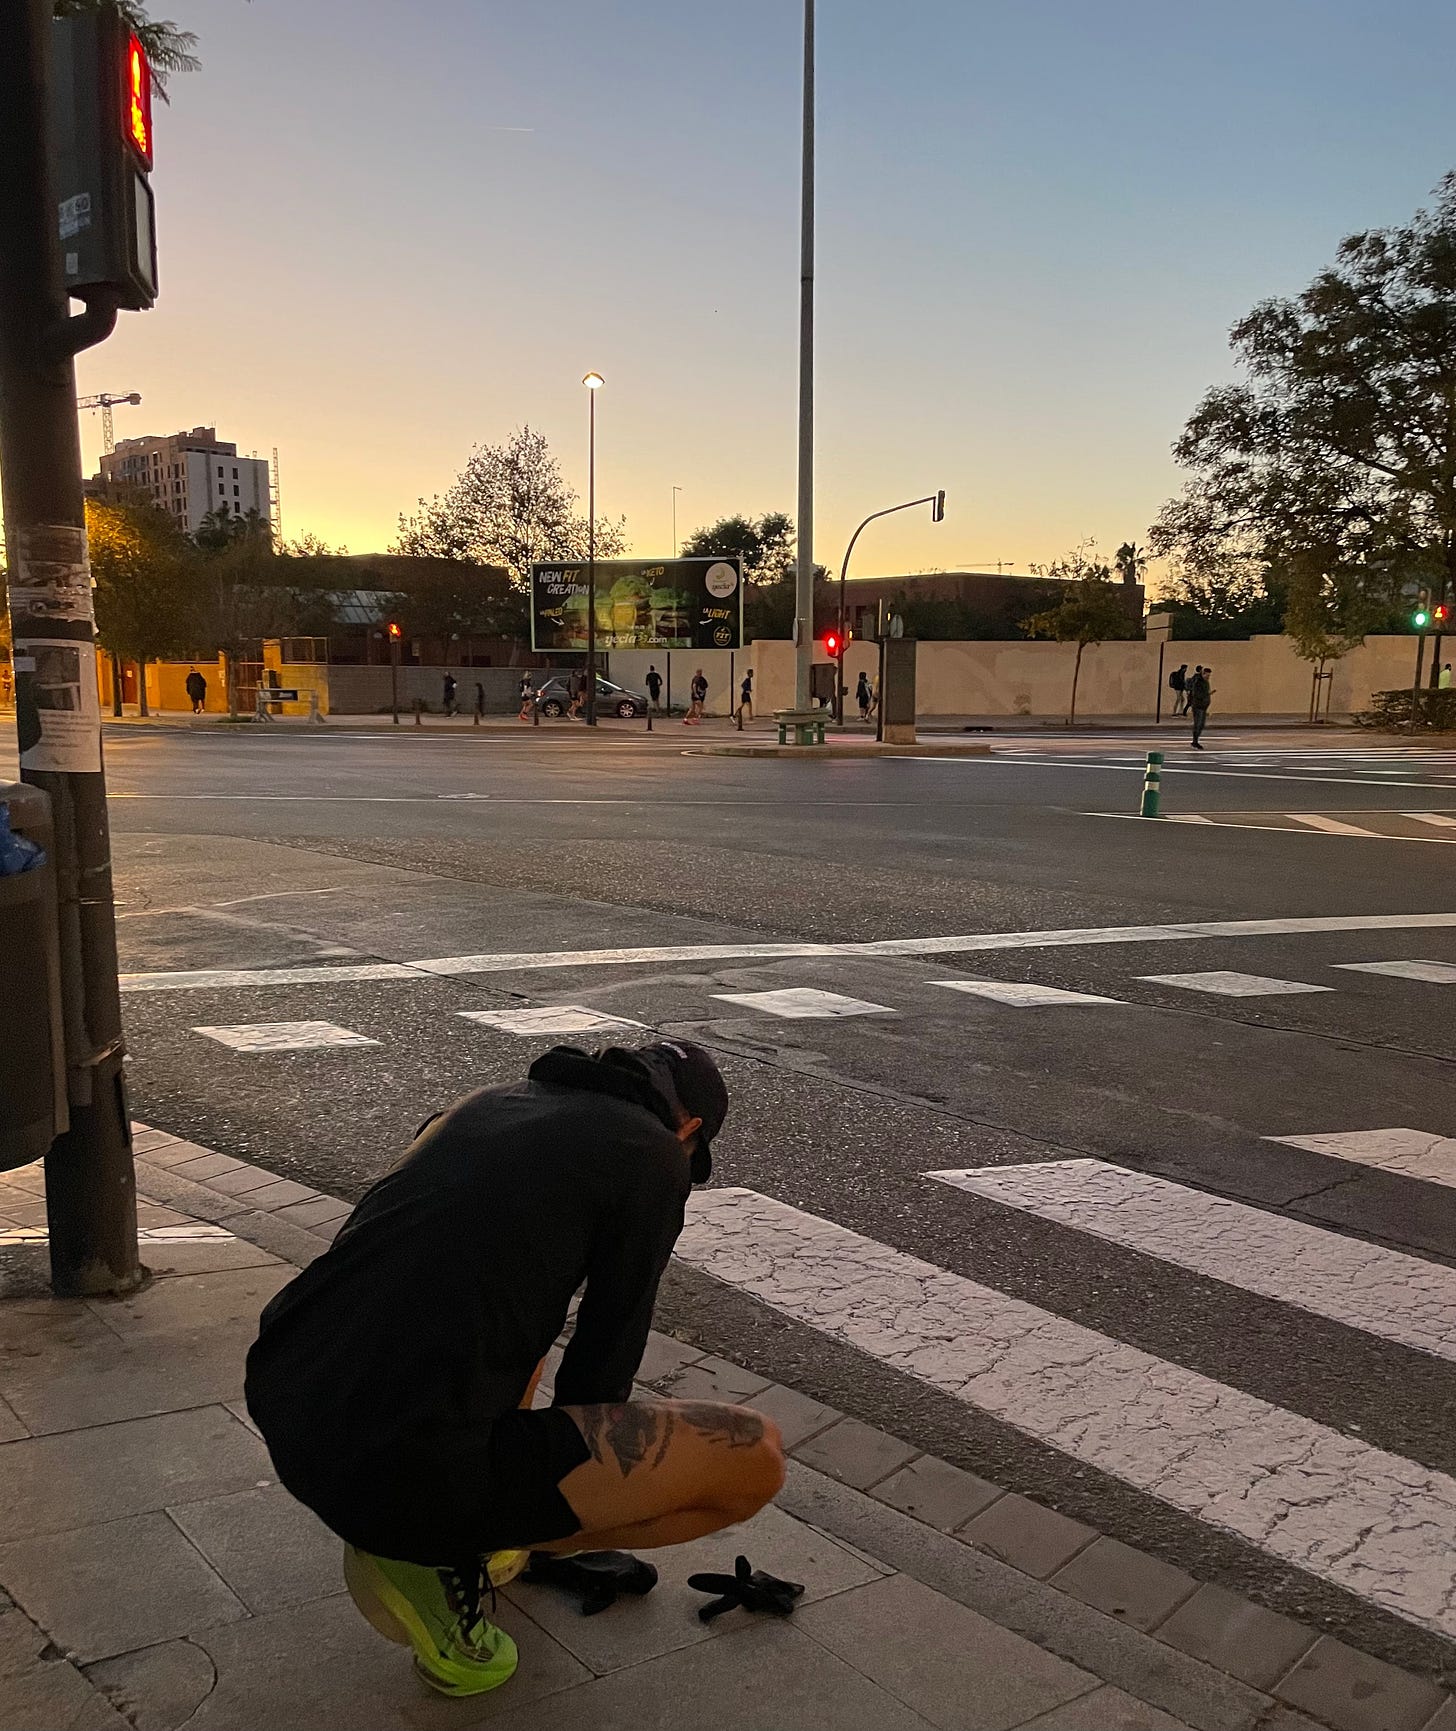 The author kneeling at a traffic light fixing his shoe laces on the roads of Valencia